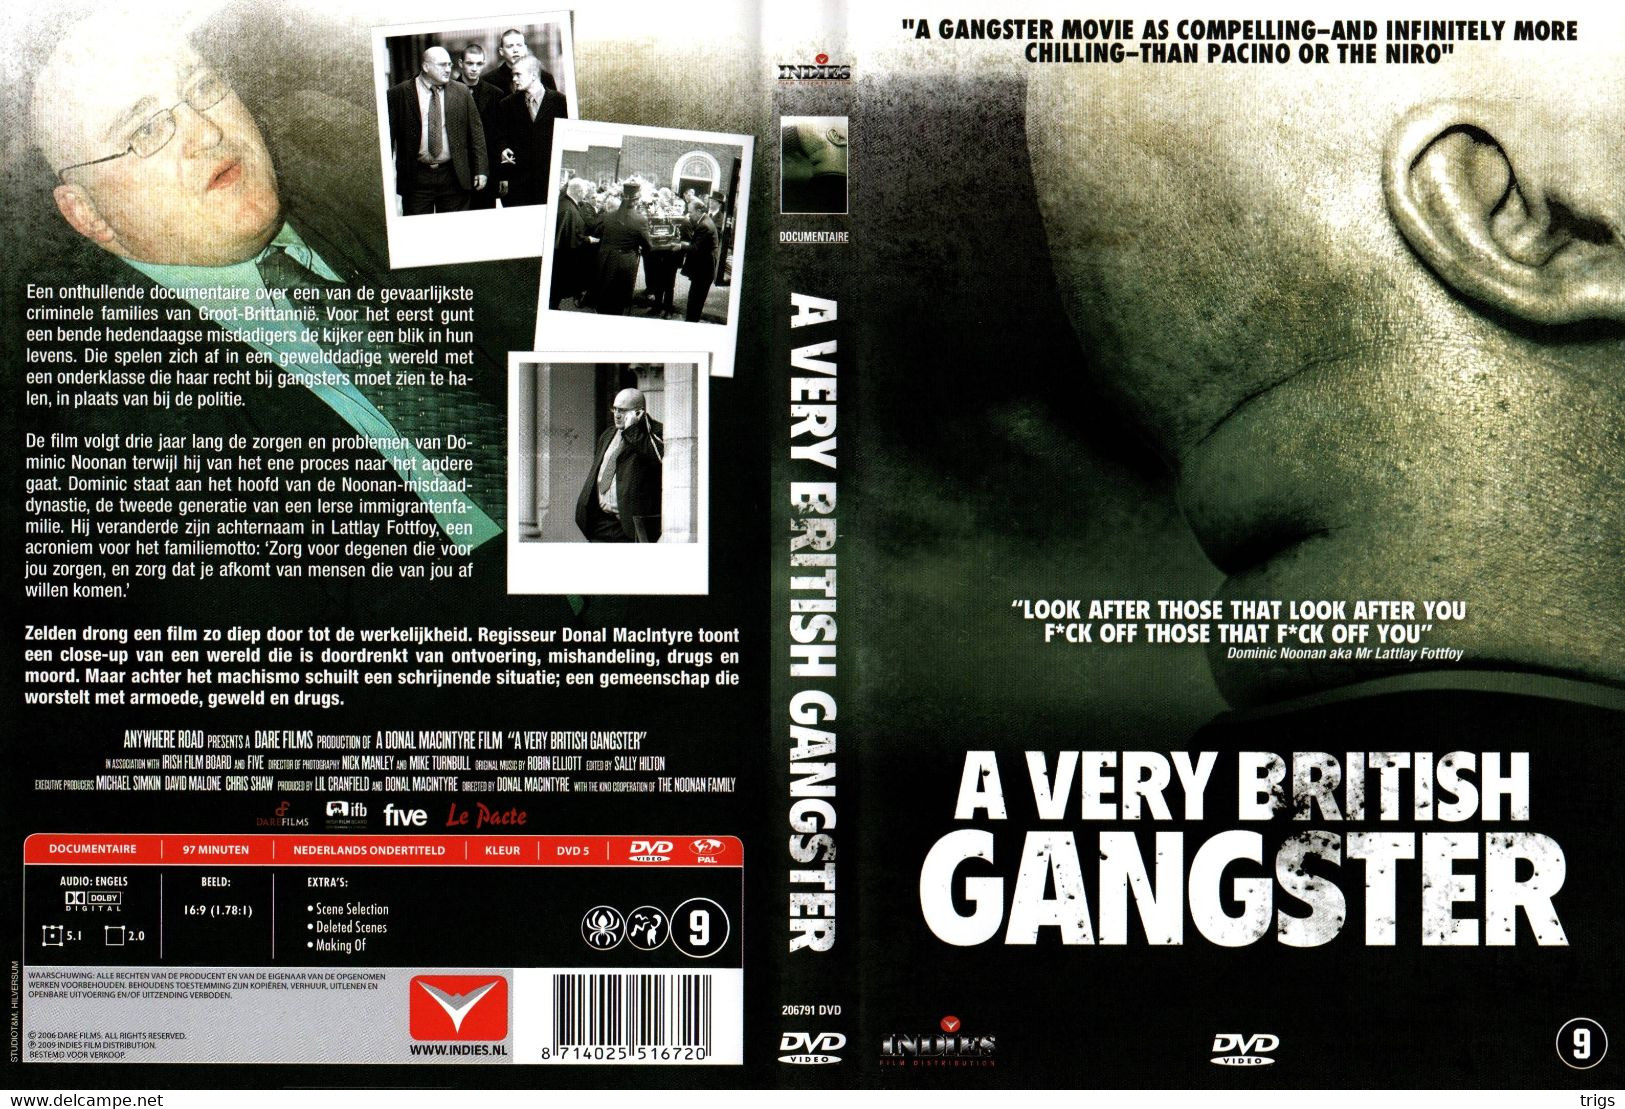 DVD - A Very British Gangster - Documentaire